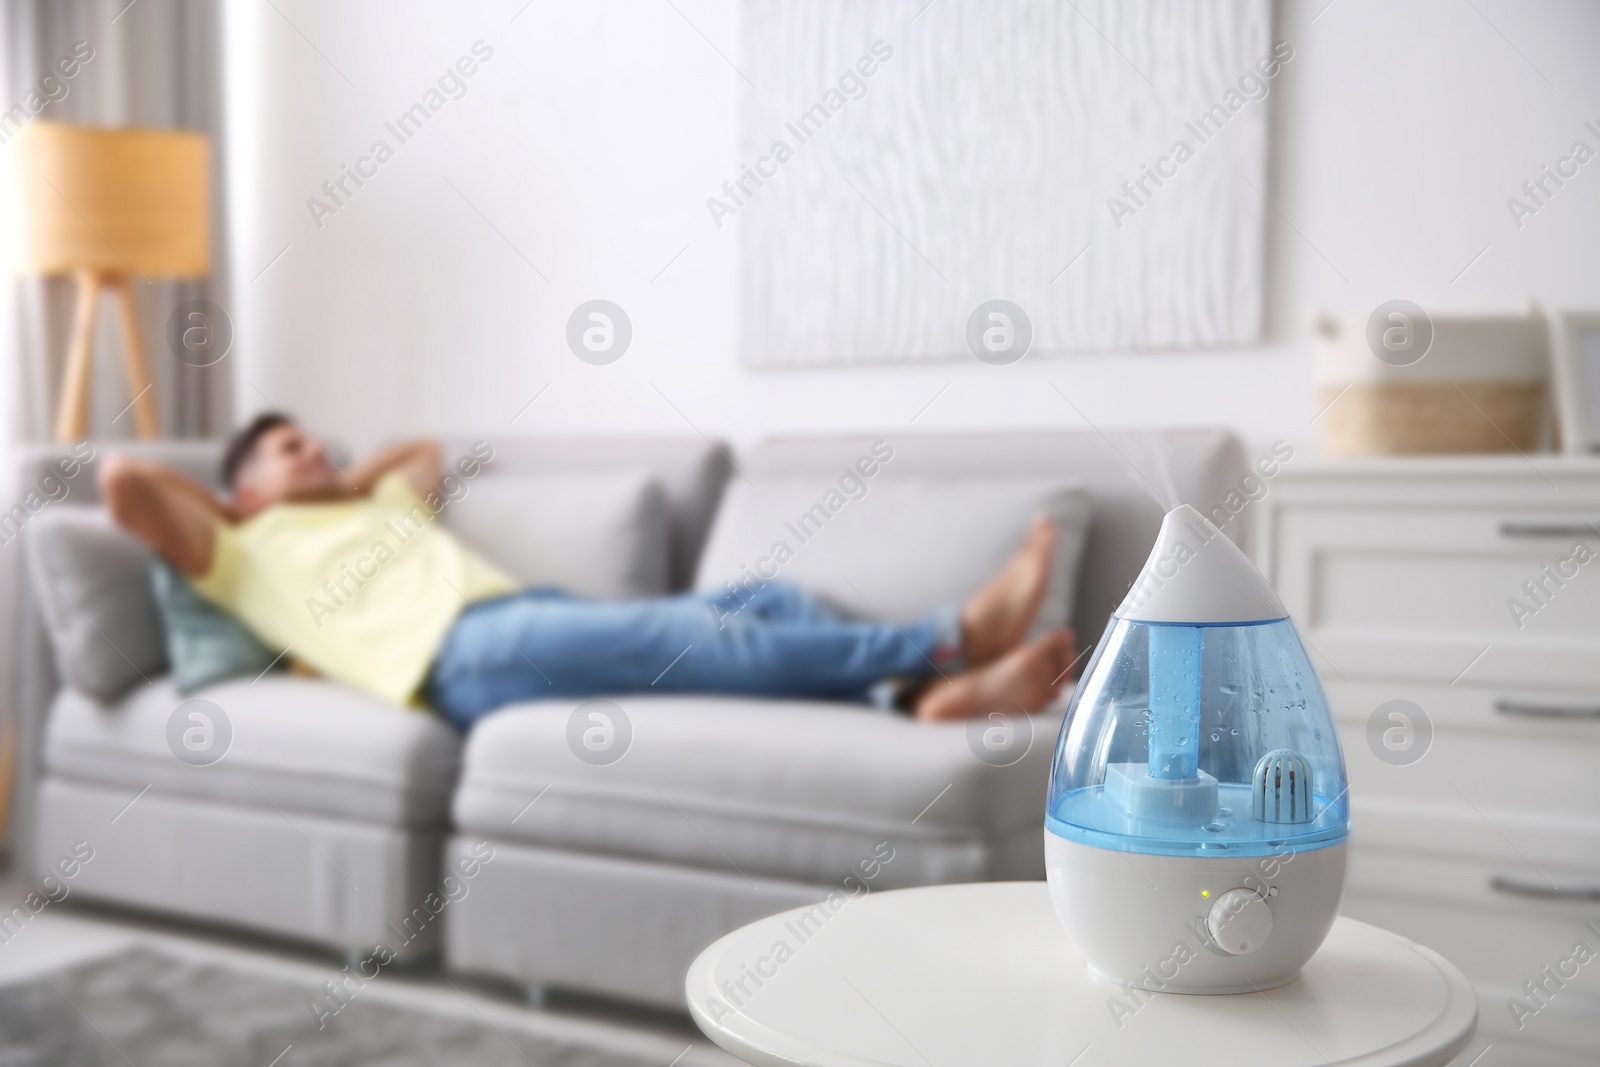 Photo of Modern air humidifier and blurred man resting on background